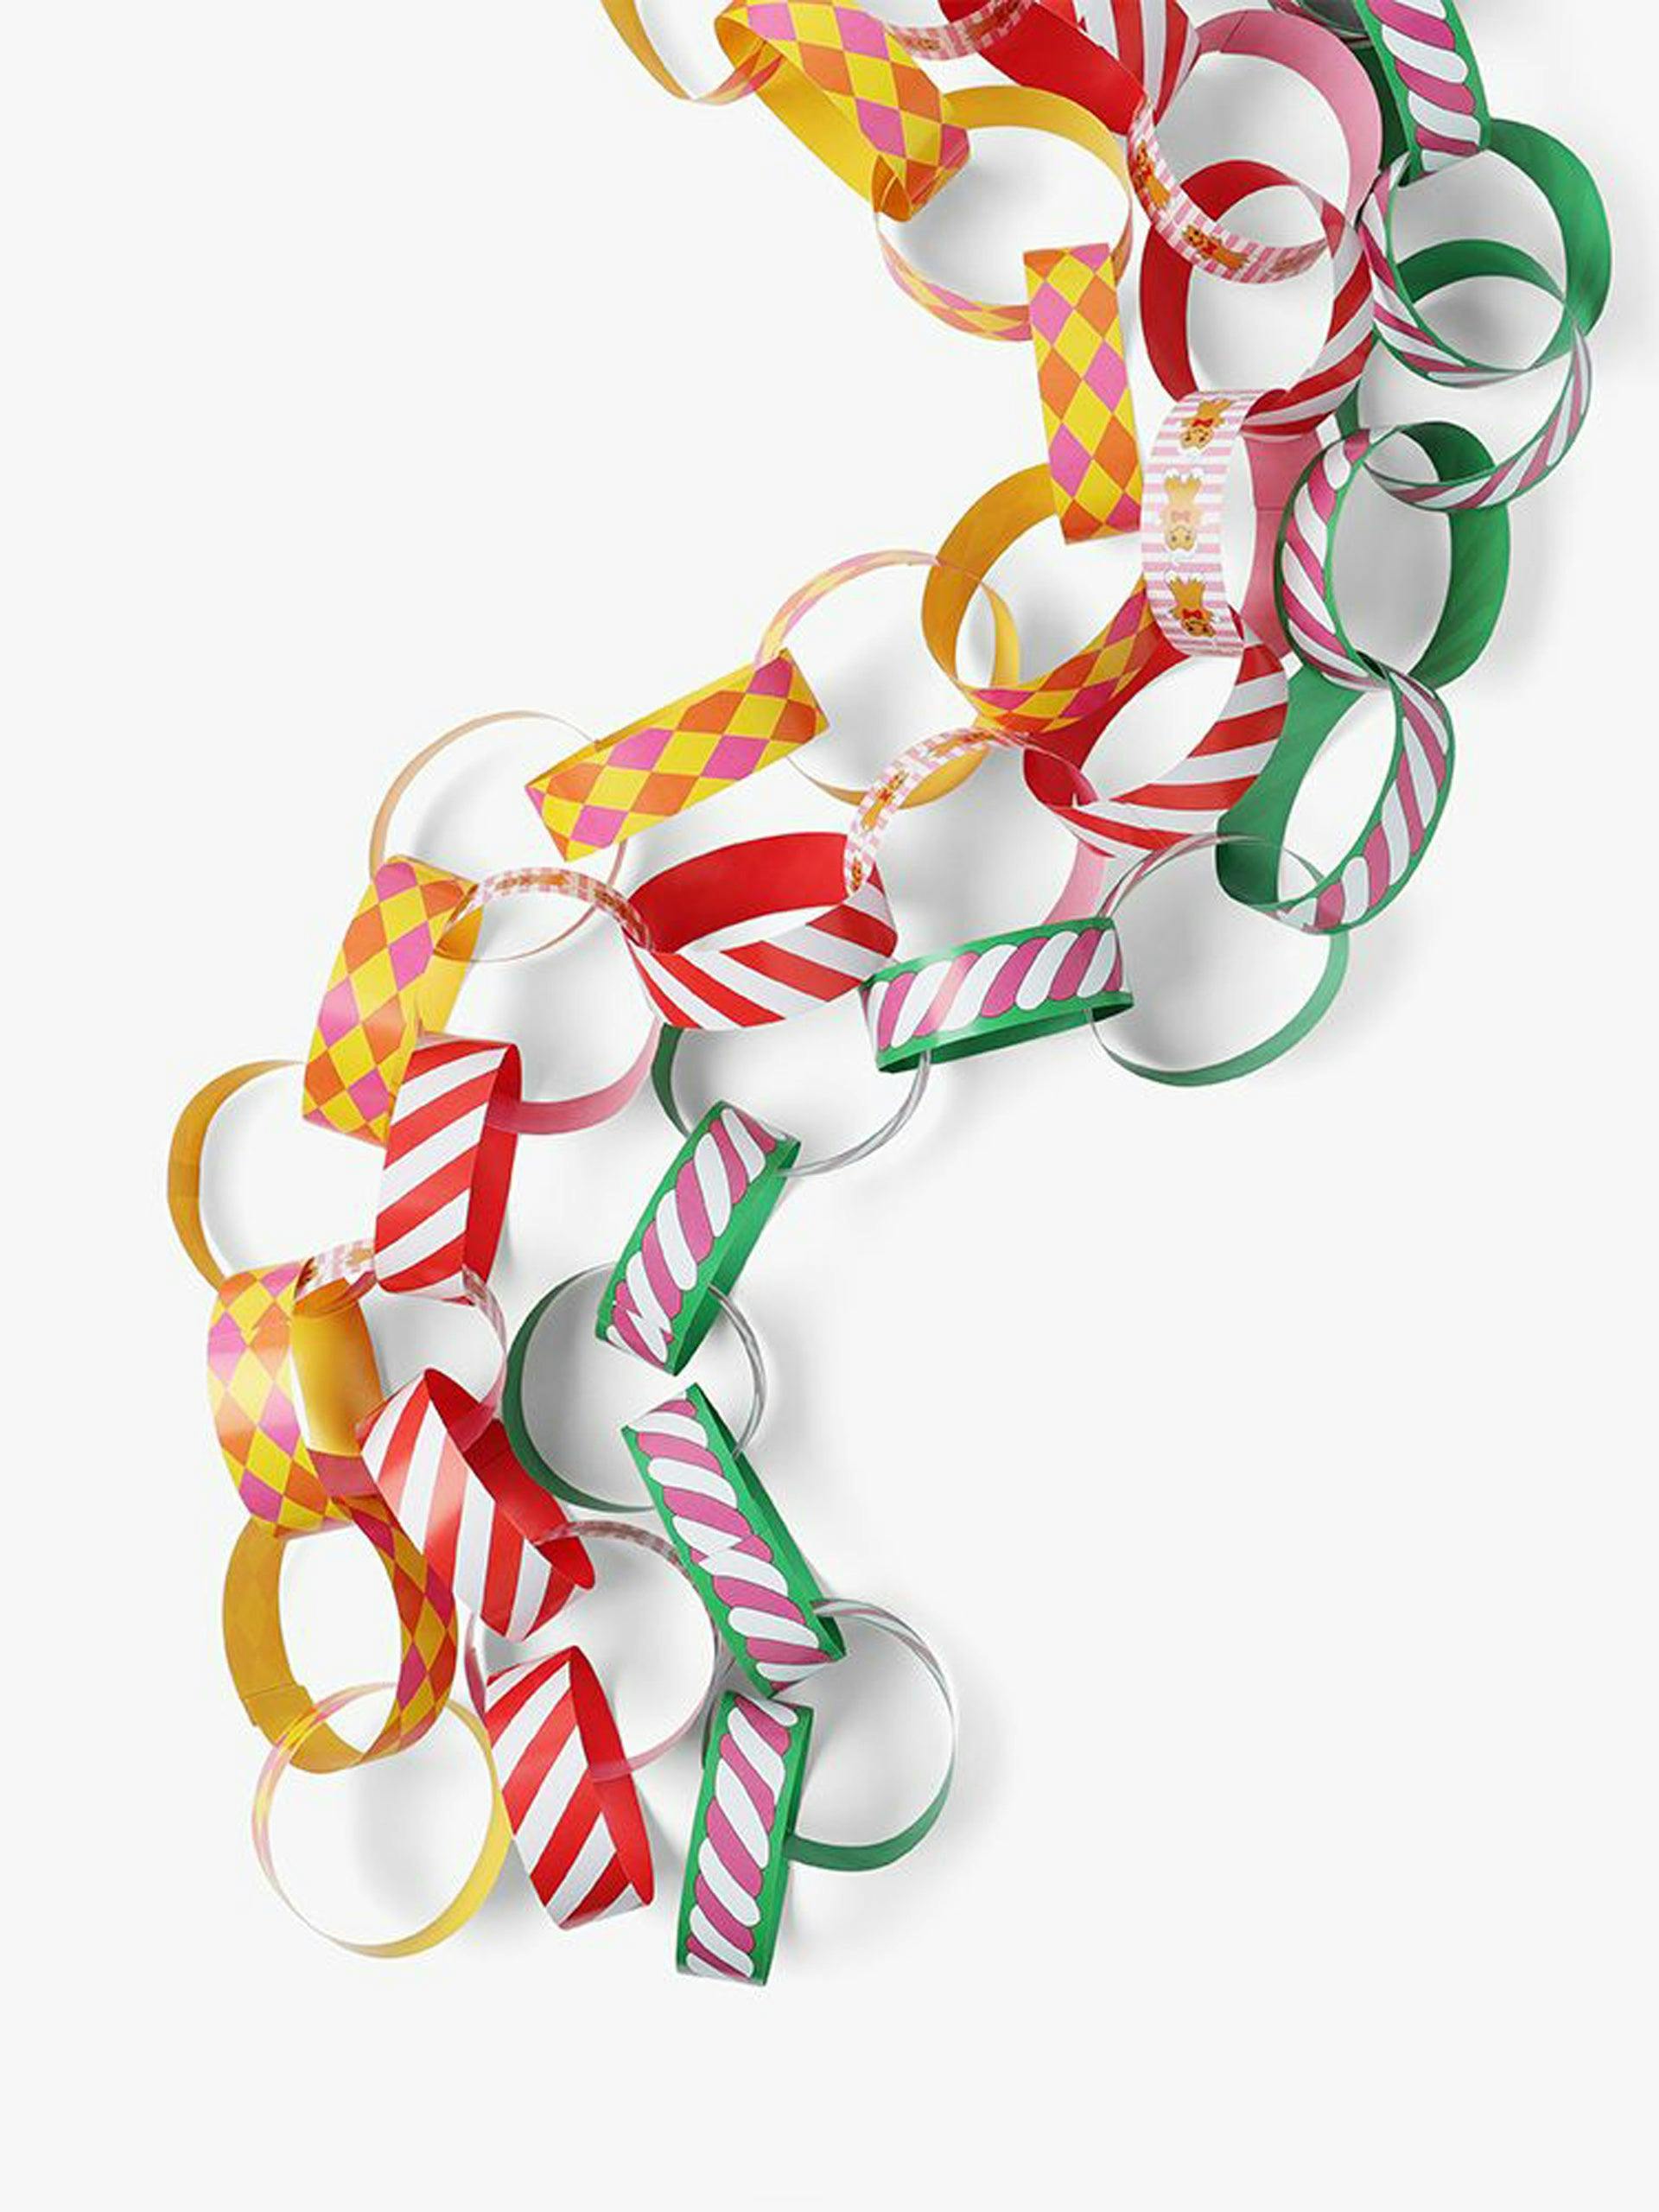 Bright Christmas paperchains